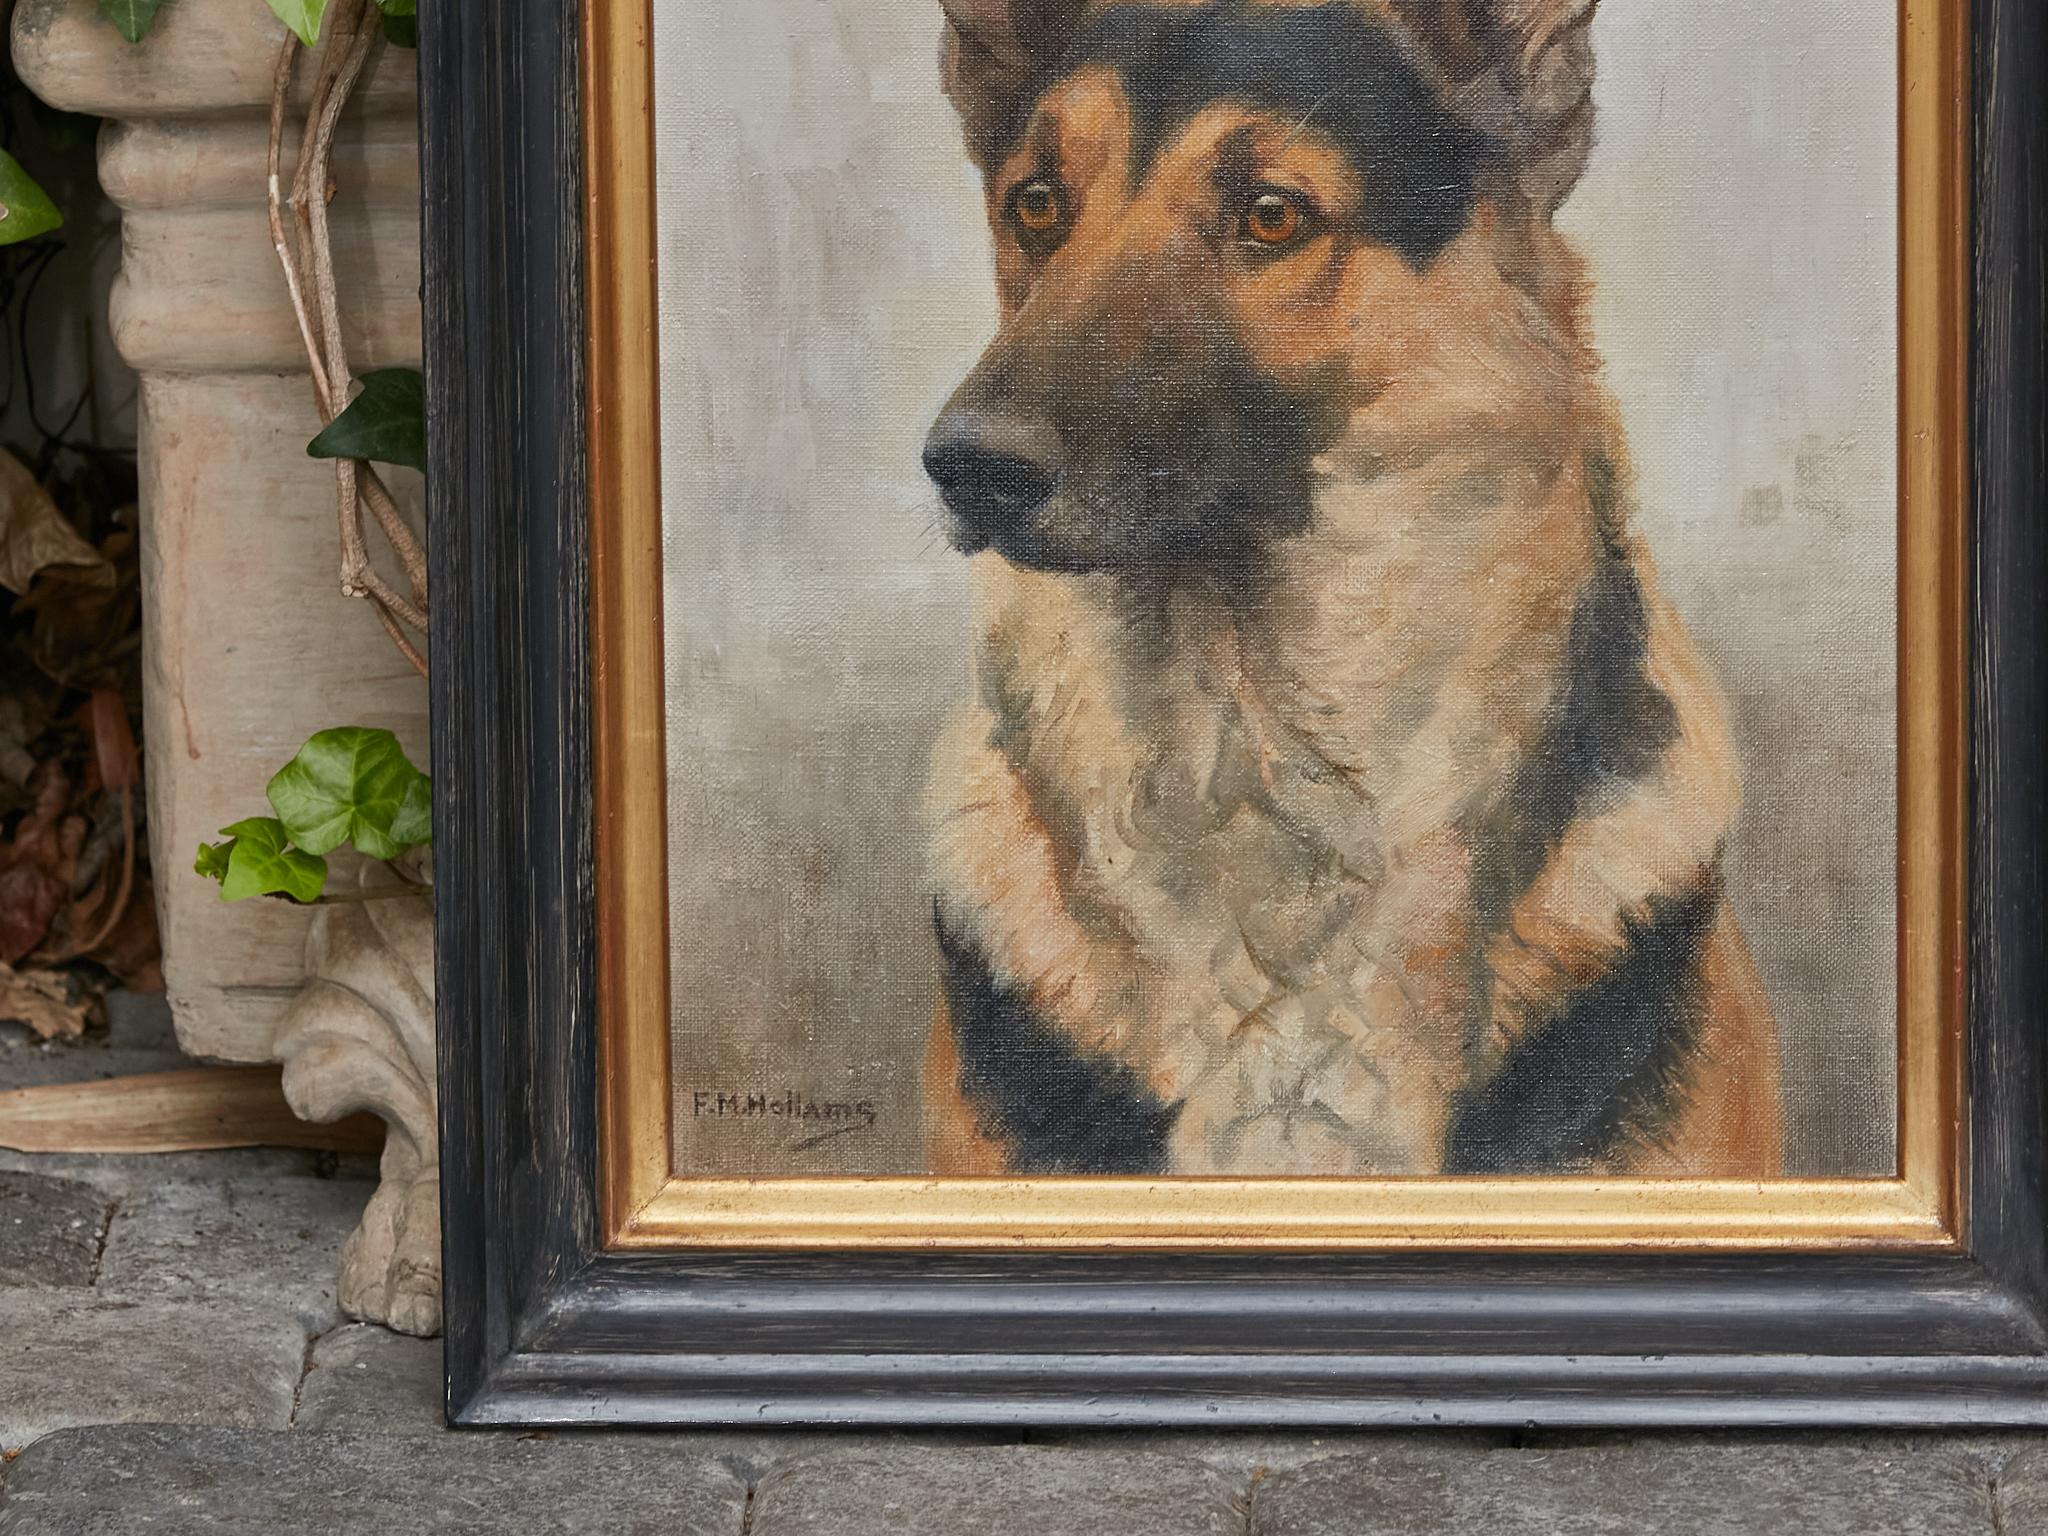 Canvas German Shepherd Painting Signed F.M Hollams, circa 1910 in Black and Gold Frame